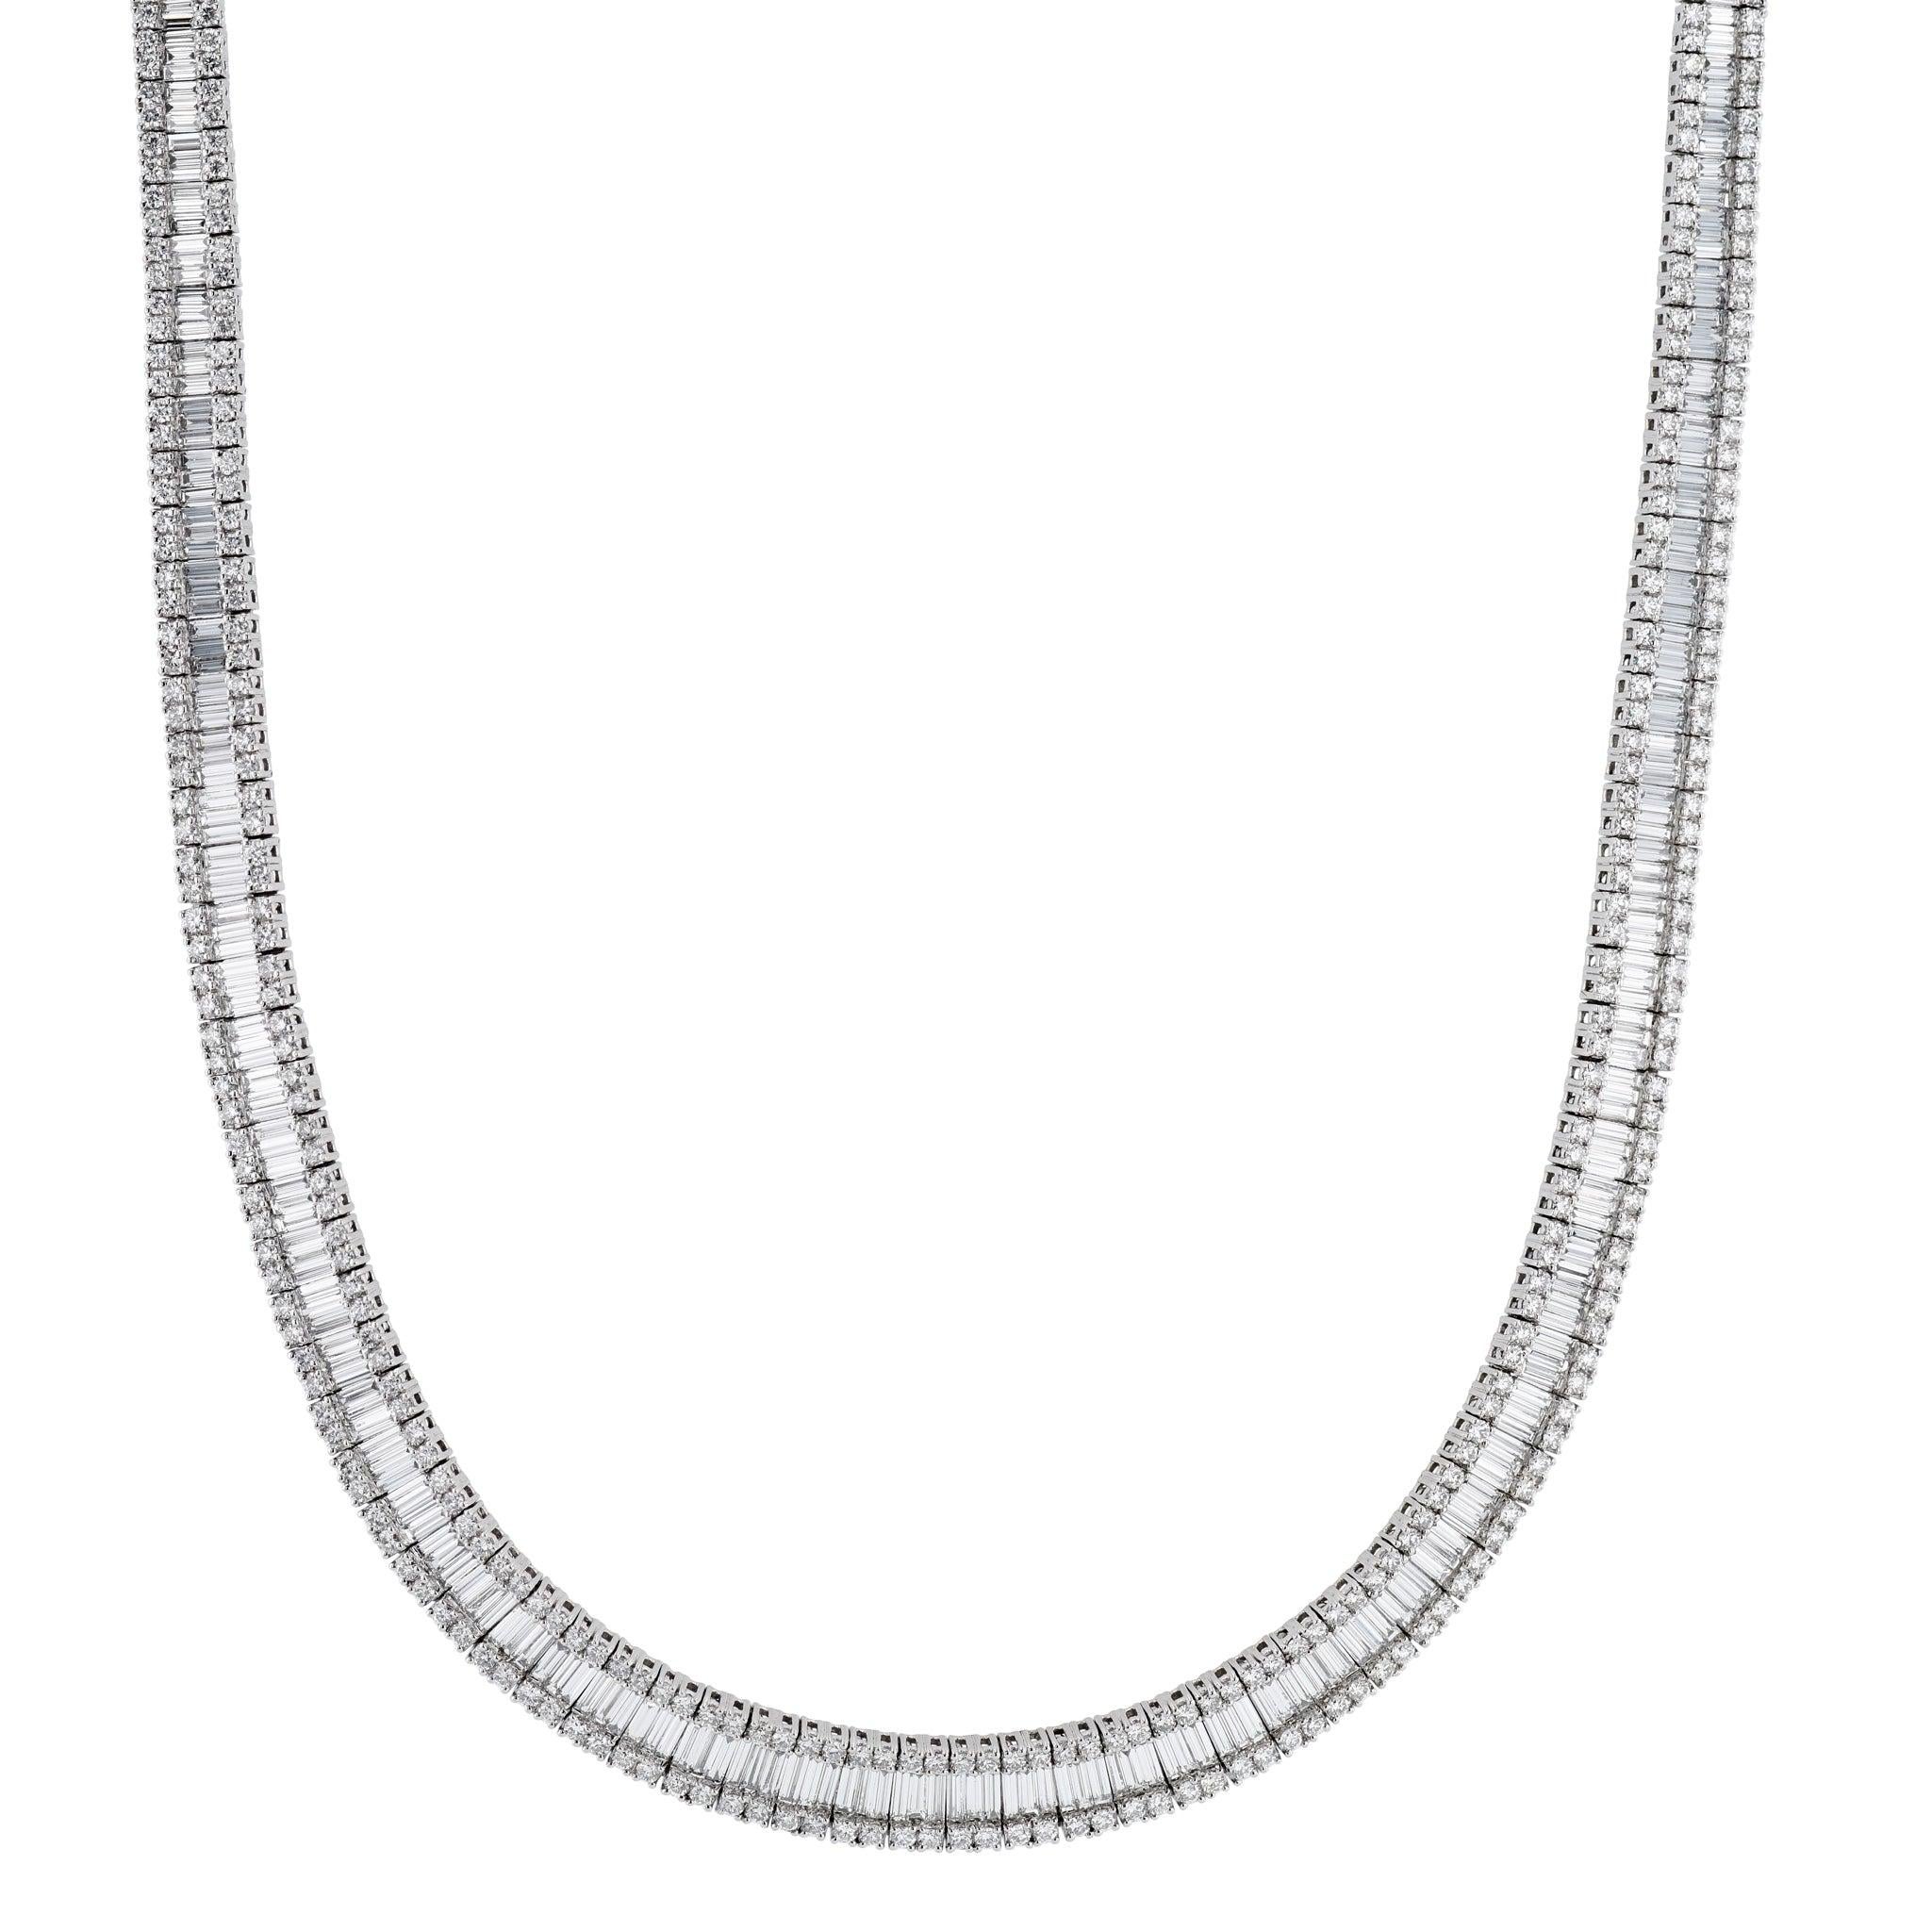 Diamond Riviera Estate Necklace - a magnificent masterpiece showcasing 26.24 Cts of shimmering diamonds and platinum! 420 Round Brilliant Cut diamonds and 210 dazzling Baguette Cut diamonds are expertly arranged in 105 diamond stations throughout